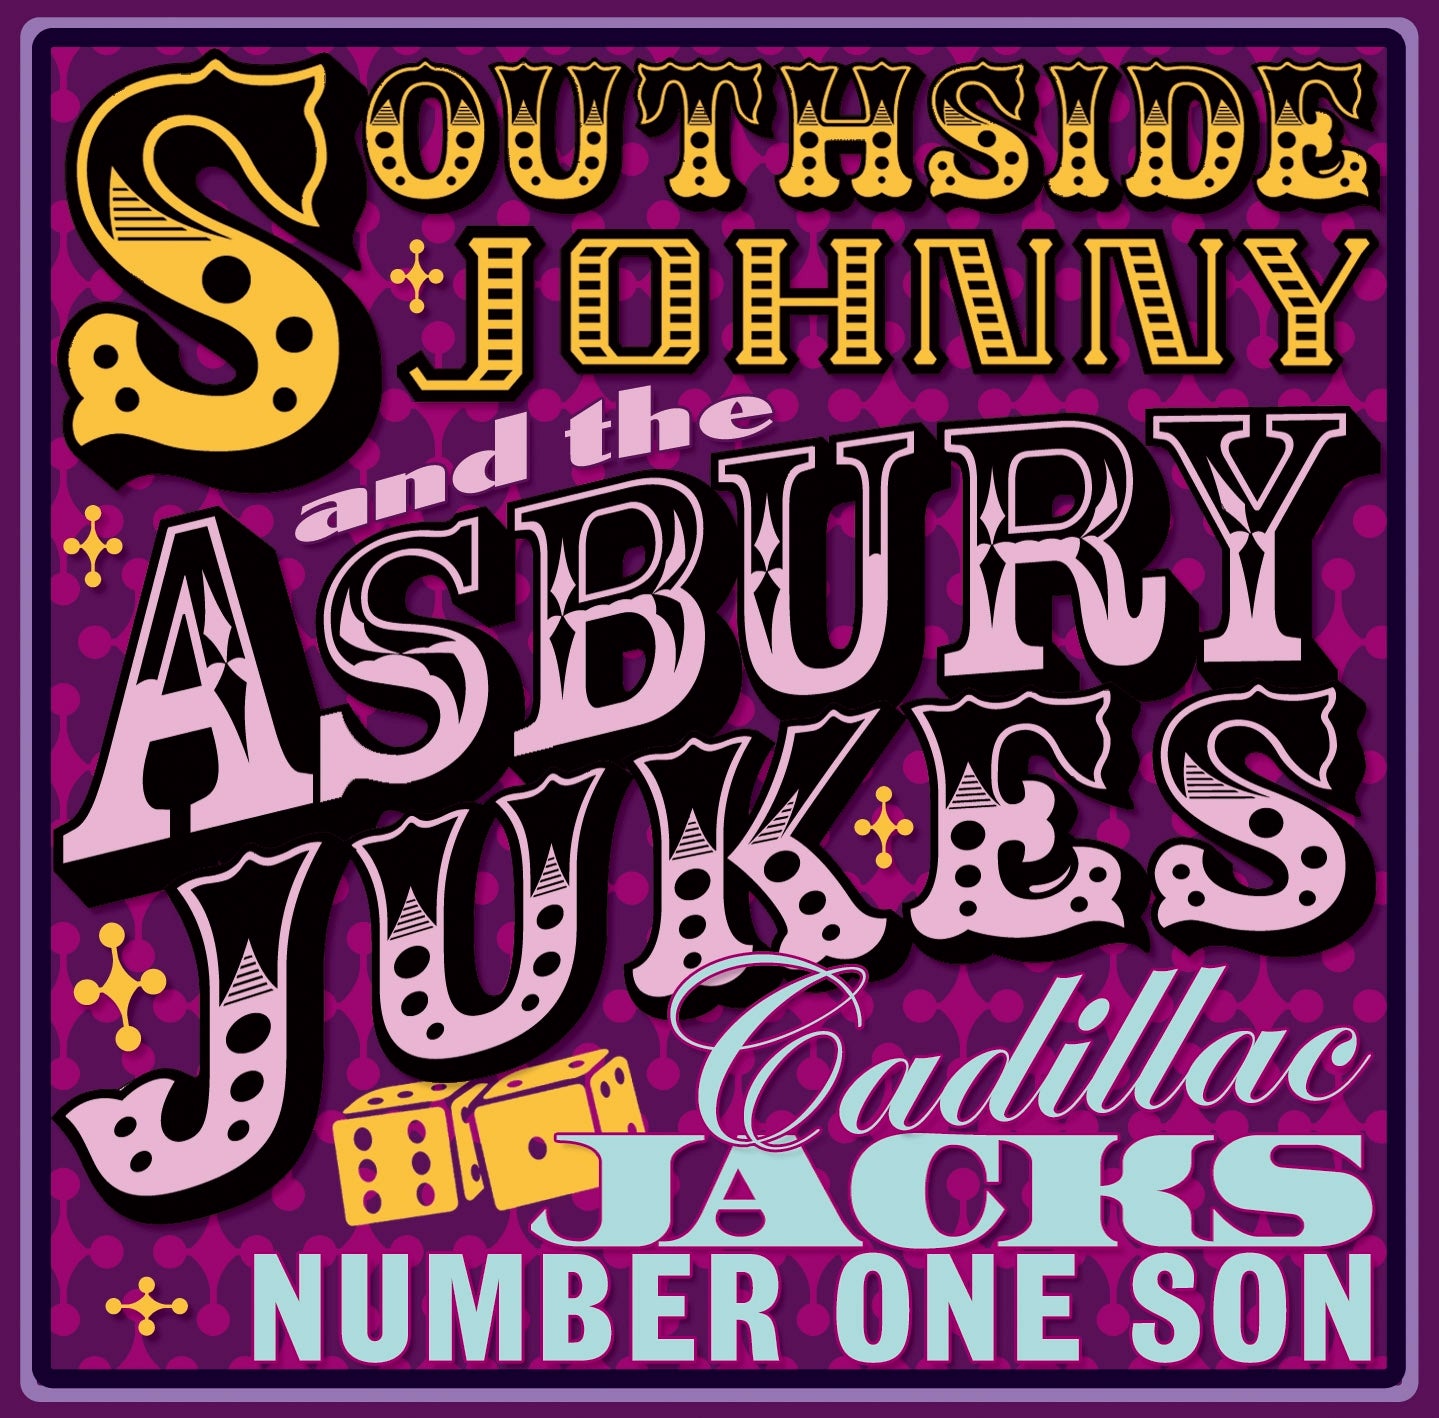 Southside Johnny & The Asbury Jukes - Cadillac Jack's Number One Son - 2CD Album - Secret Records Limited